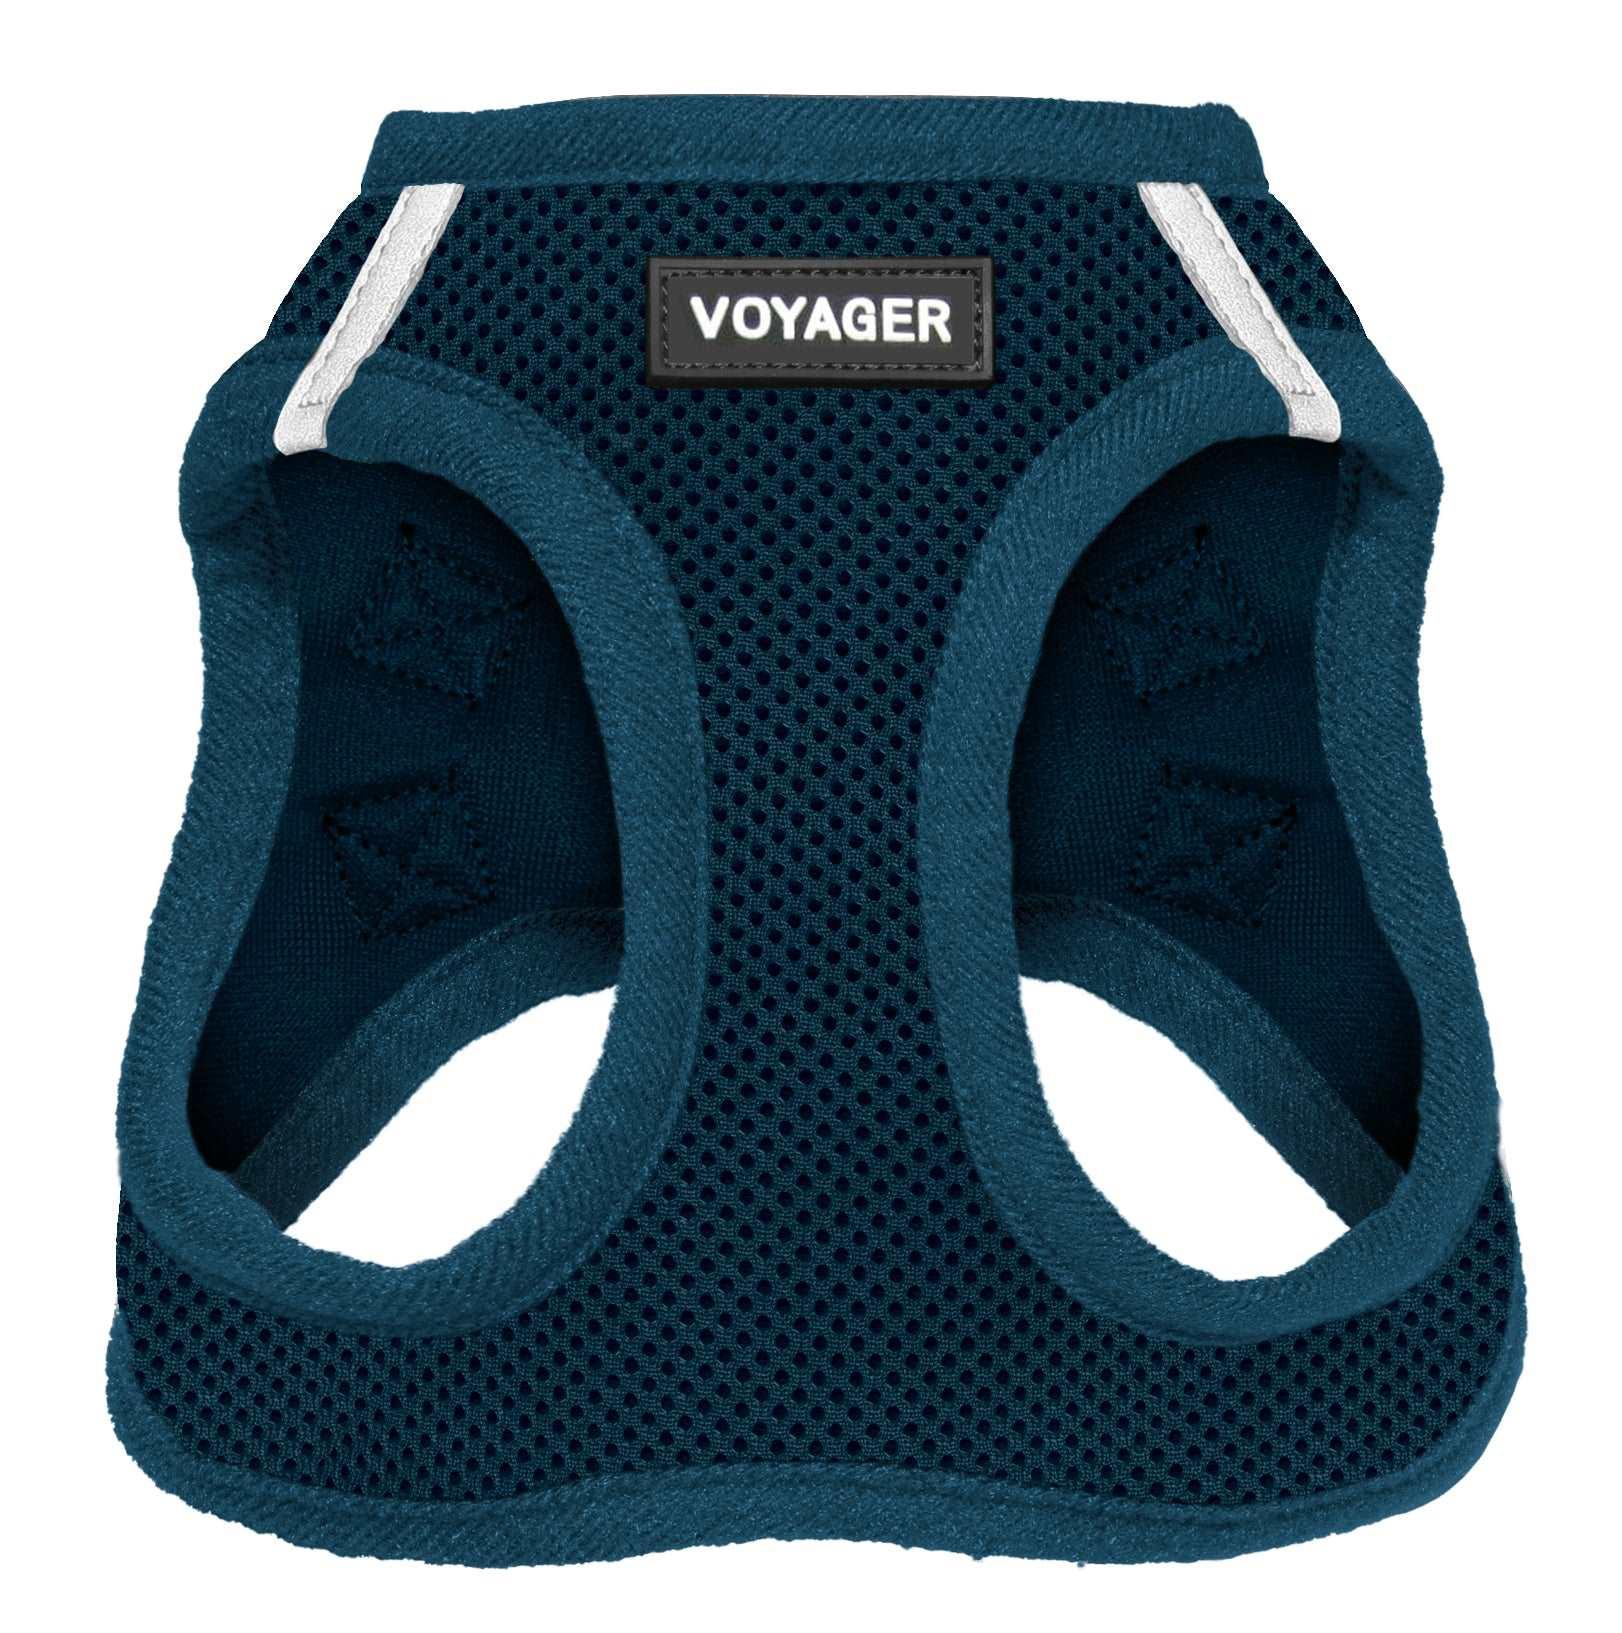 VOYAGER Step-In Air Pet Harness in Navy Blue with Matching Trim and Webbing - Expanded